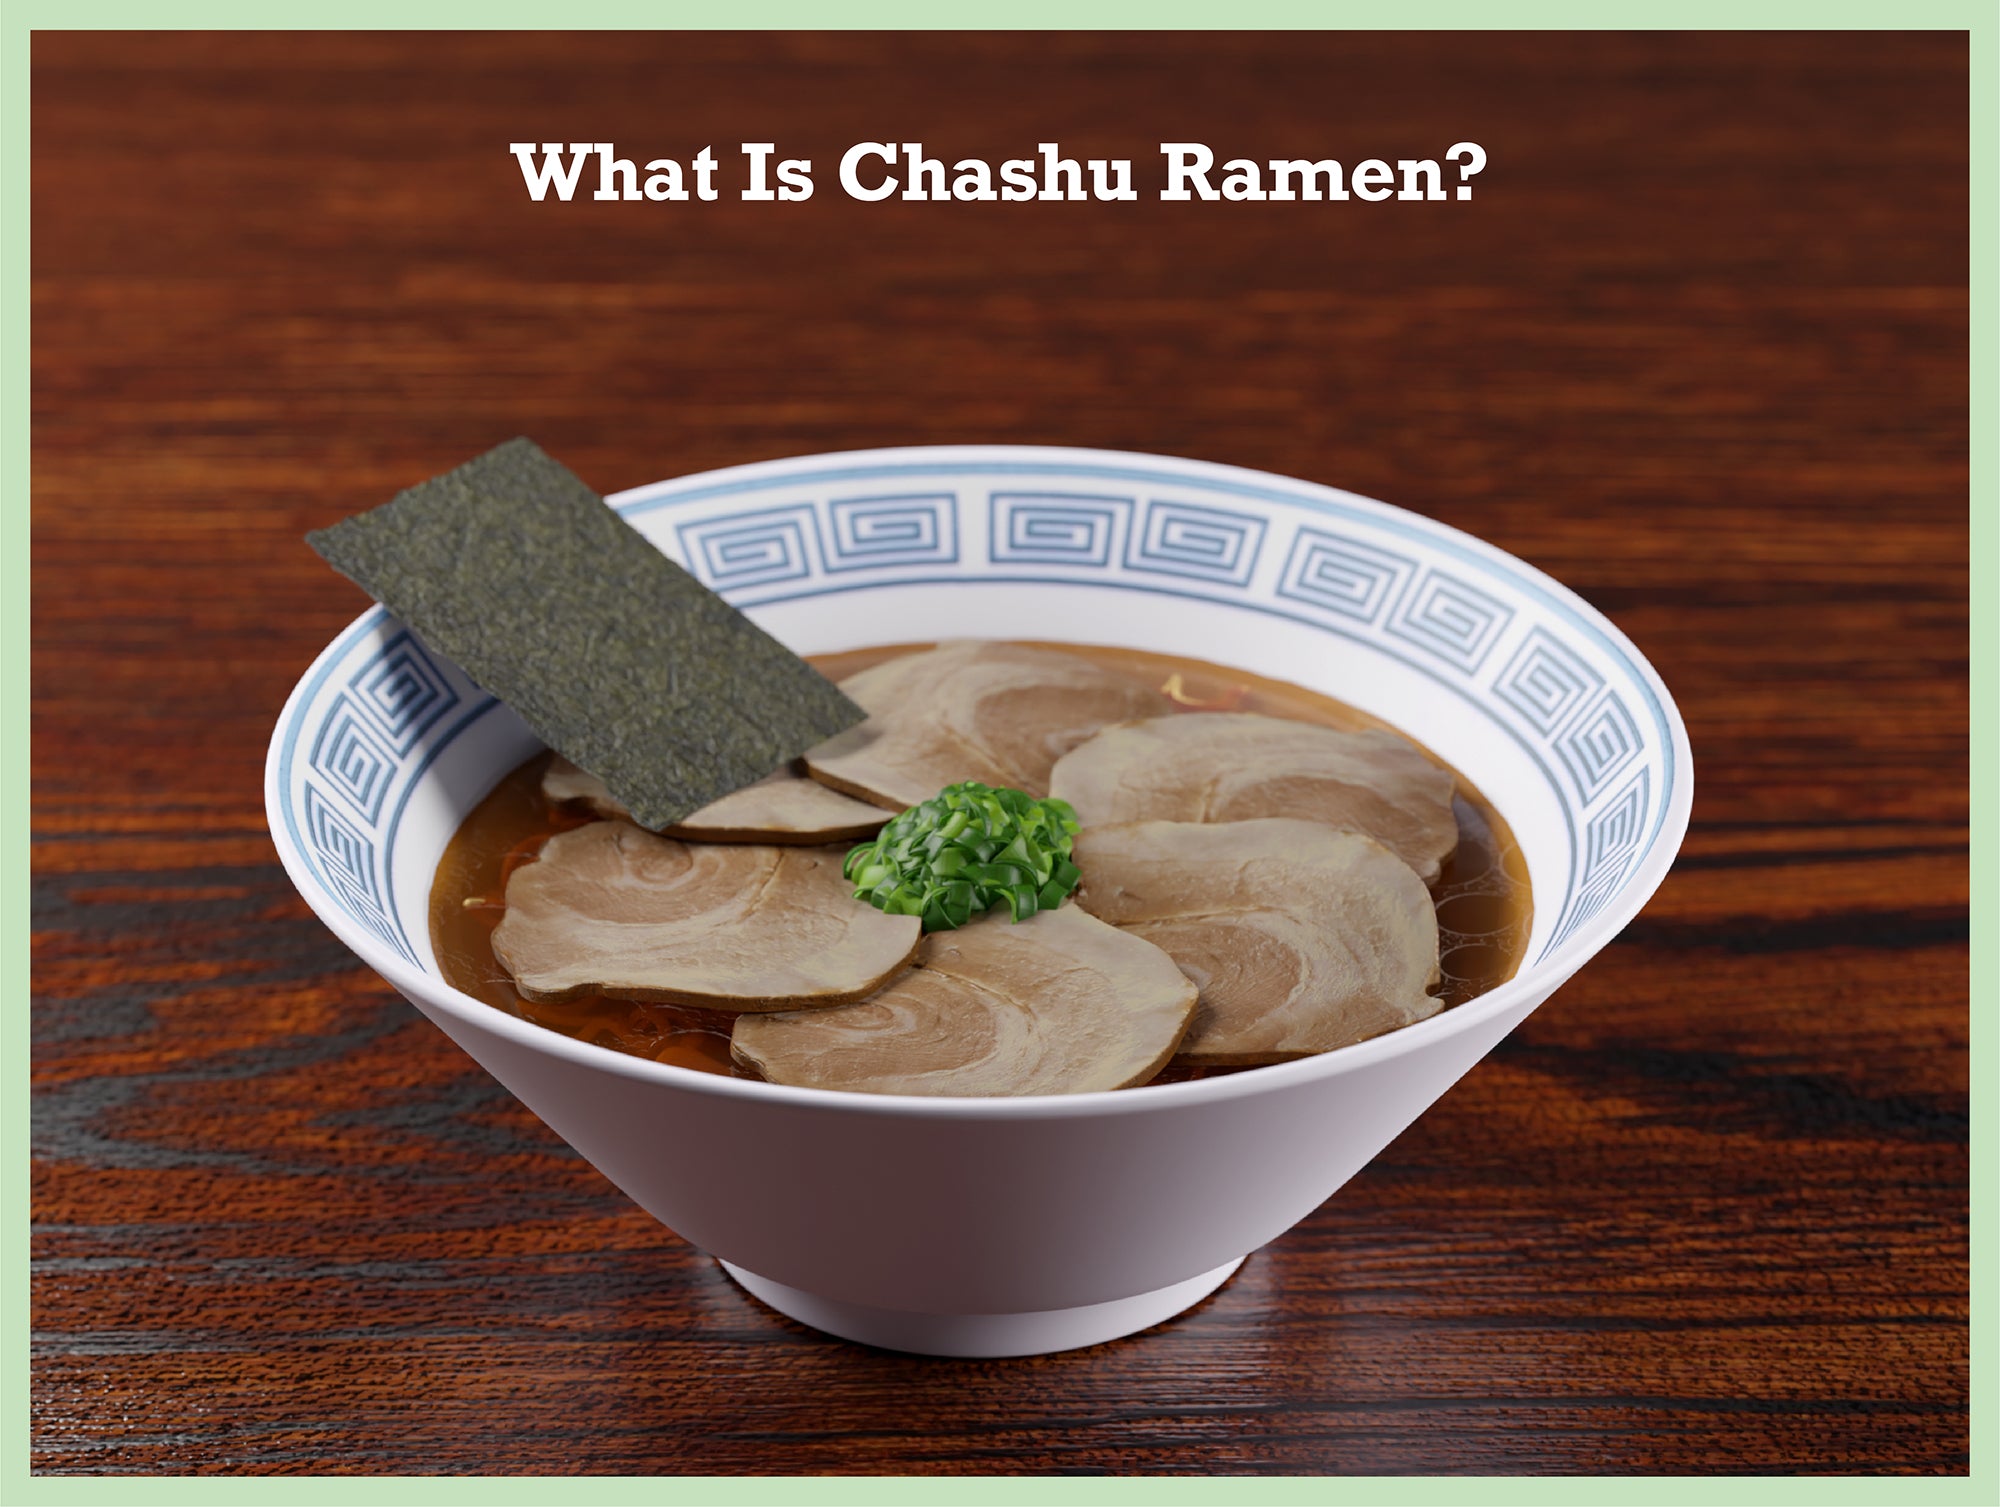 What Is Chashu Ramen: Will You Be Confused When Ordering at A Ramen Shop Again?